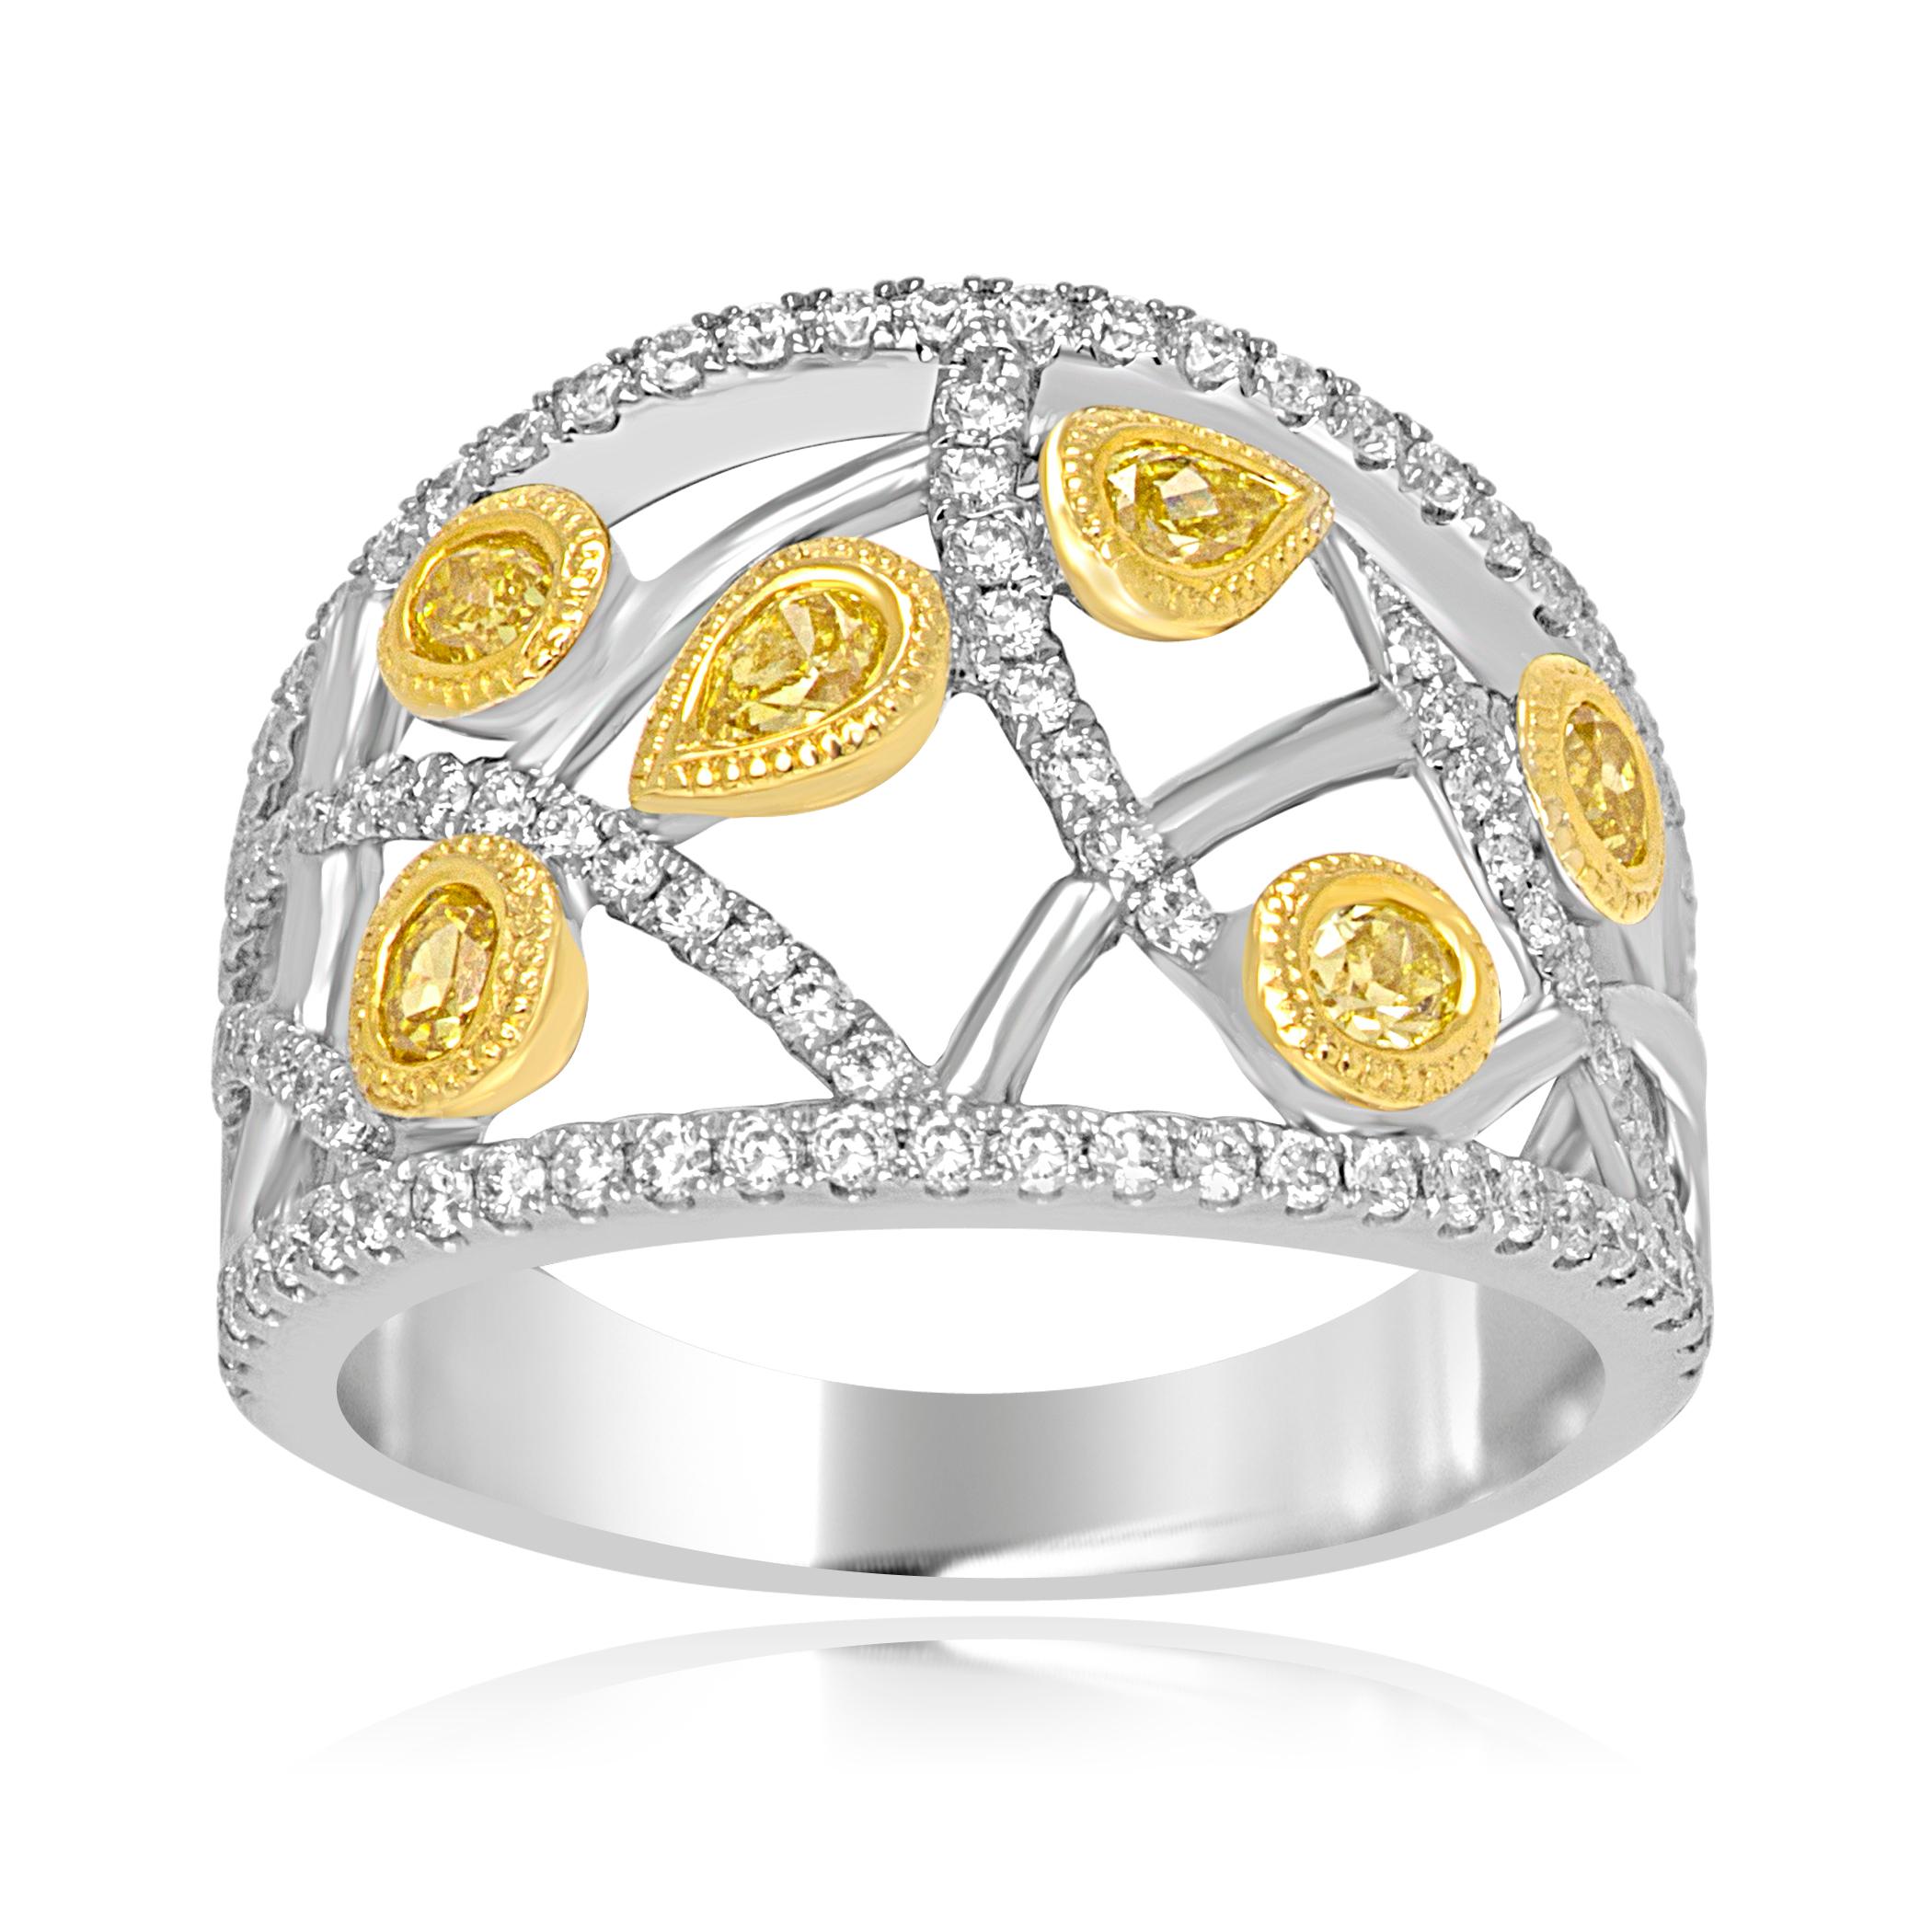 6 Fancy Yellow MIx Shapes VS-SI clarity diamonds 0.38 Carat set with 100 Round White Colorless VS-SI clarity Diamond 0.51 Carat set 14K White and Yellow Gold Fashion Cocktail Dome Band Ring with Beautiful Filigree Work.

Total Diamond Weight 0.90